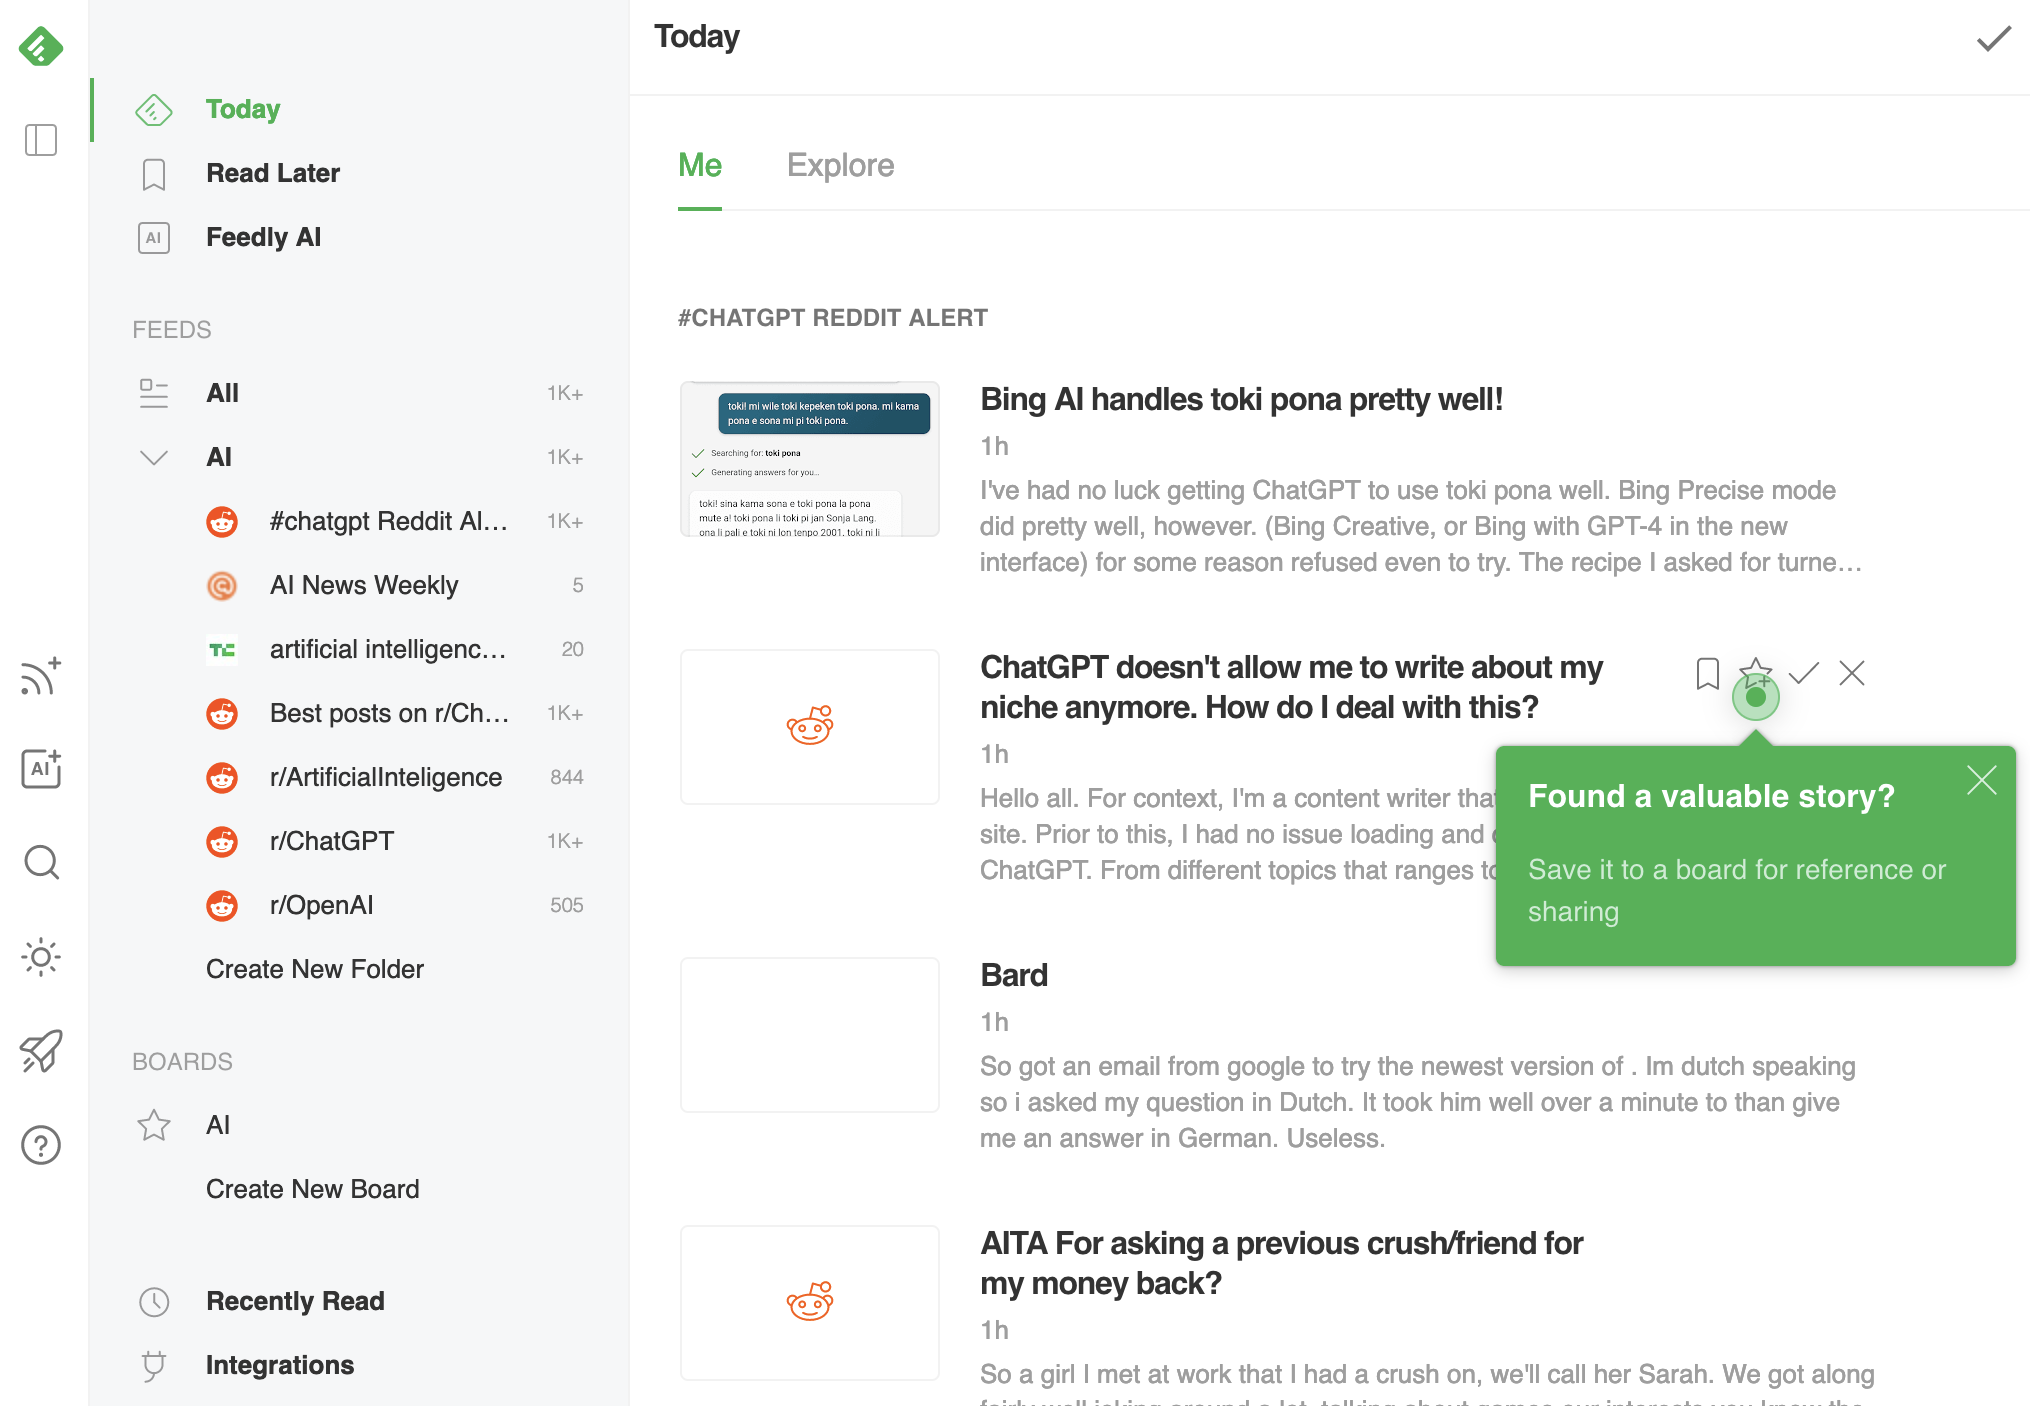 How to Migrate from Google Reader to Feedly